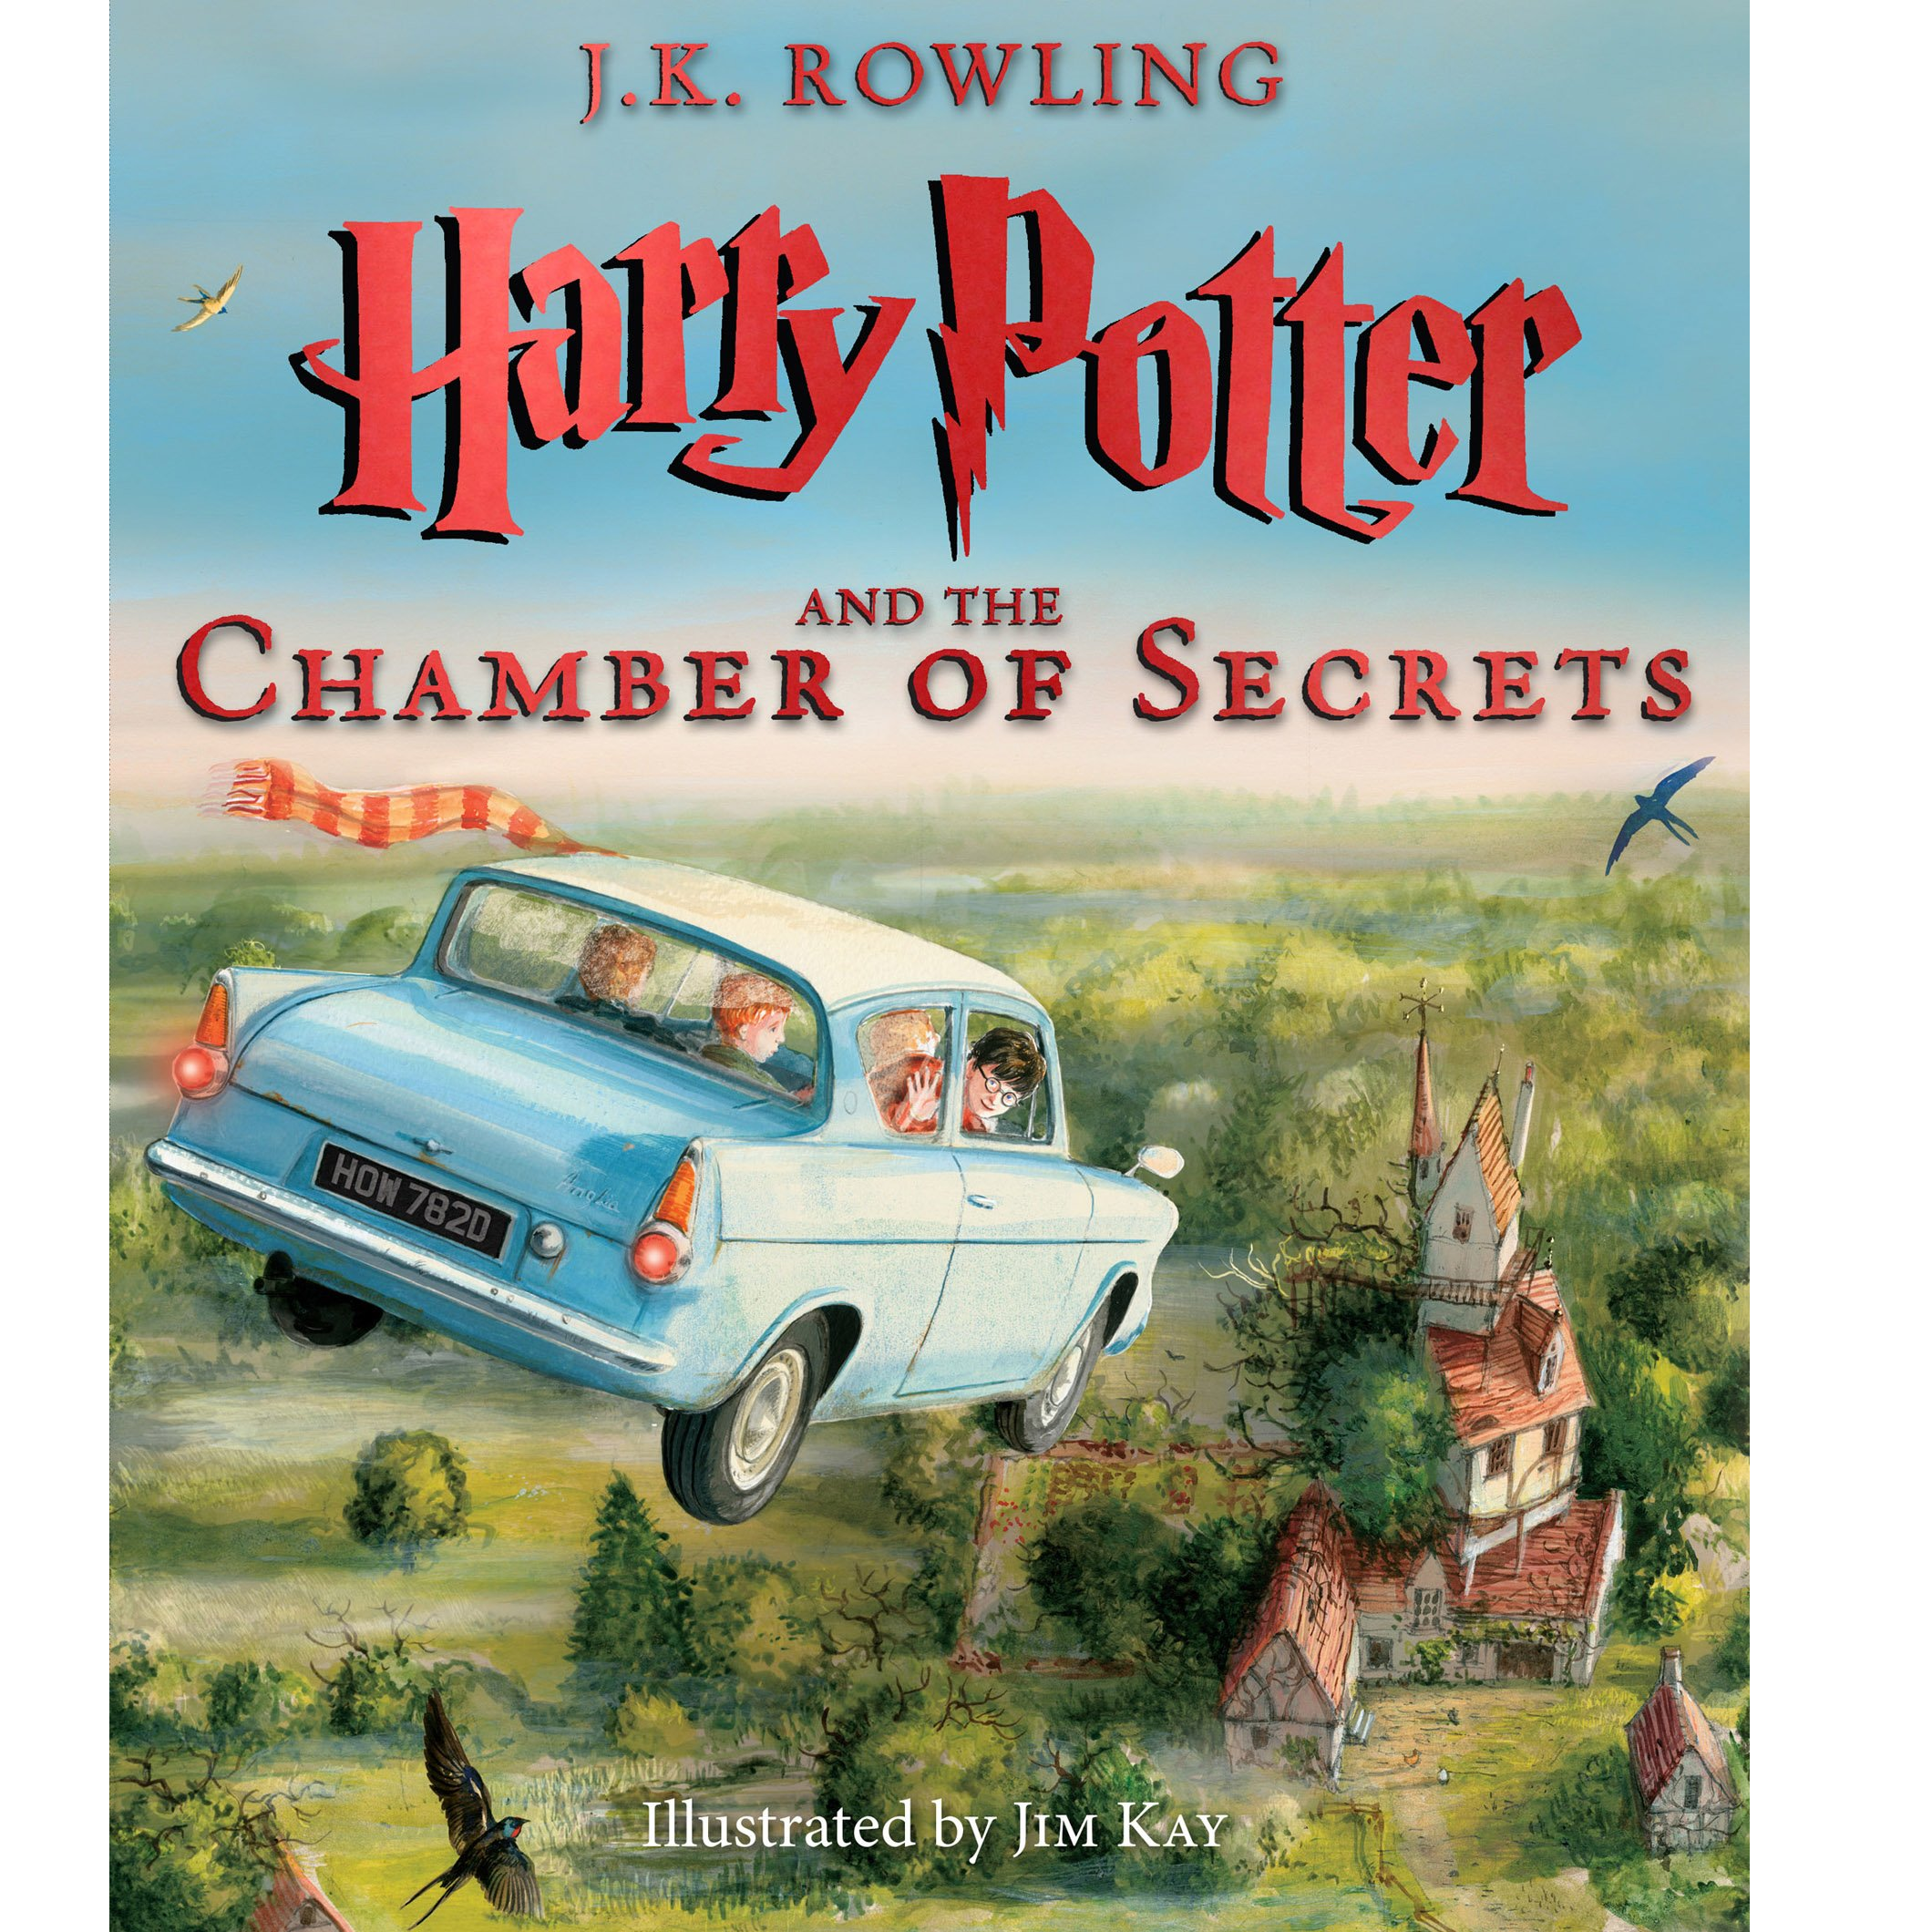 Harry Potter and the Chamber of Secrets: The Illustrated Edition Book 2 Only $23.99 on Amazon!